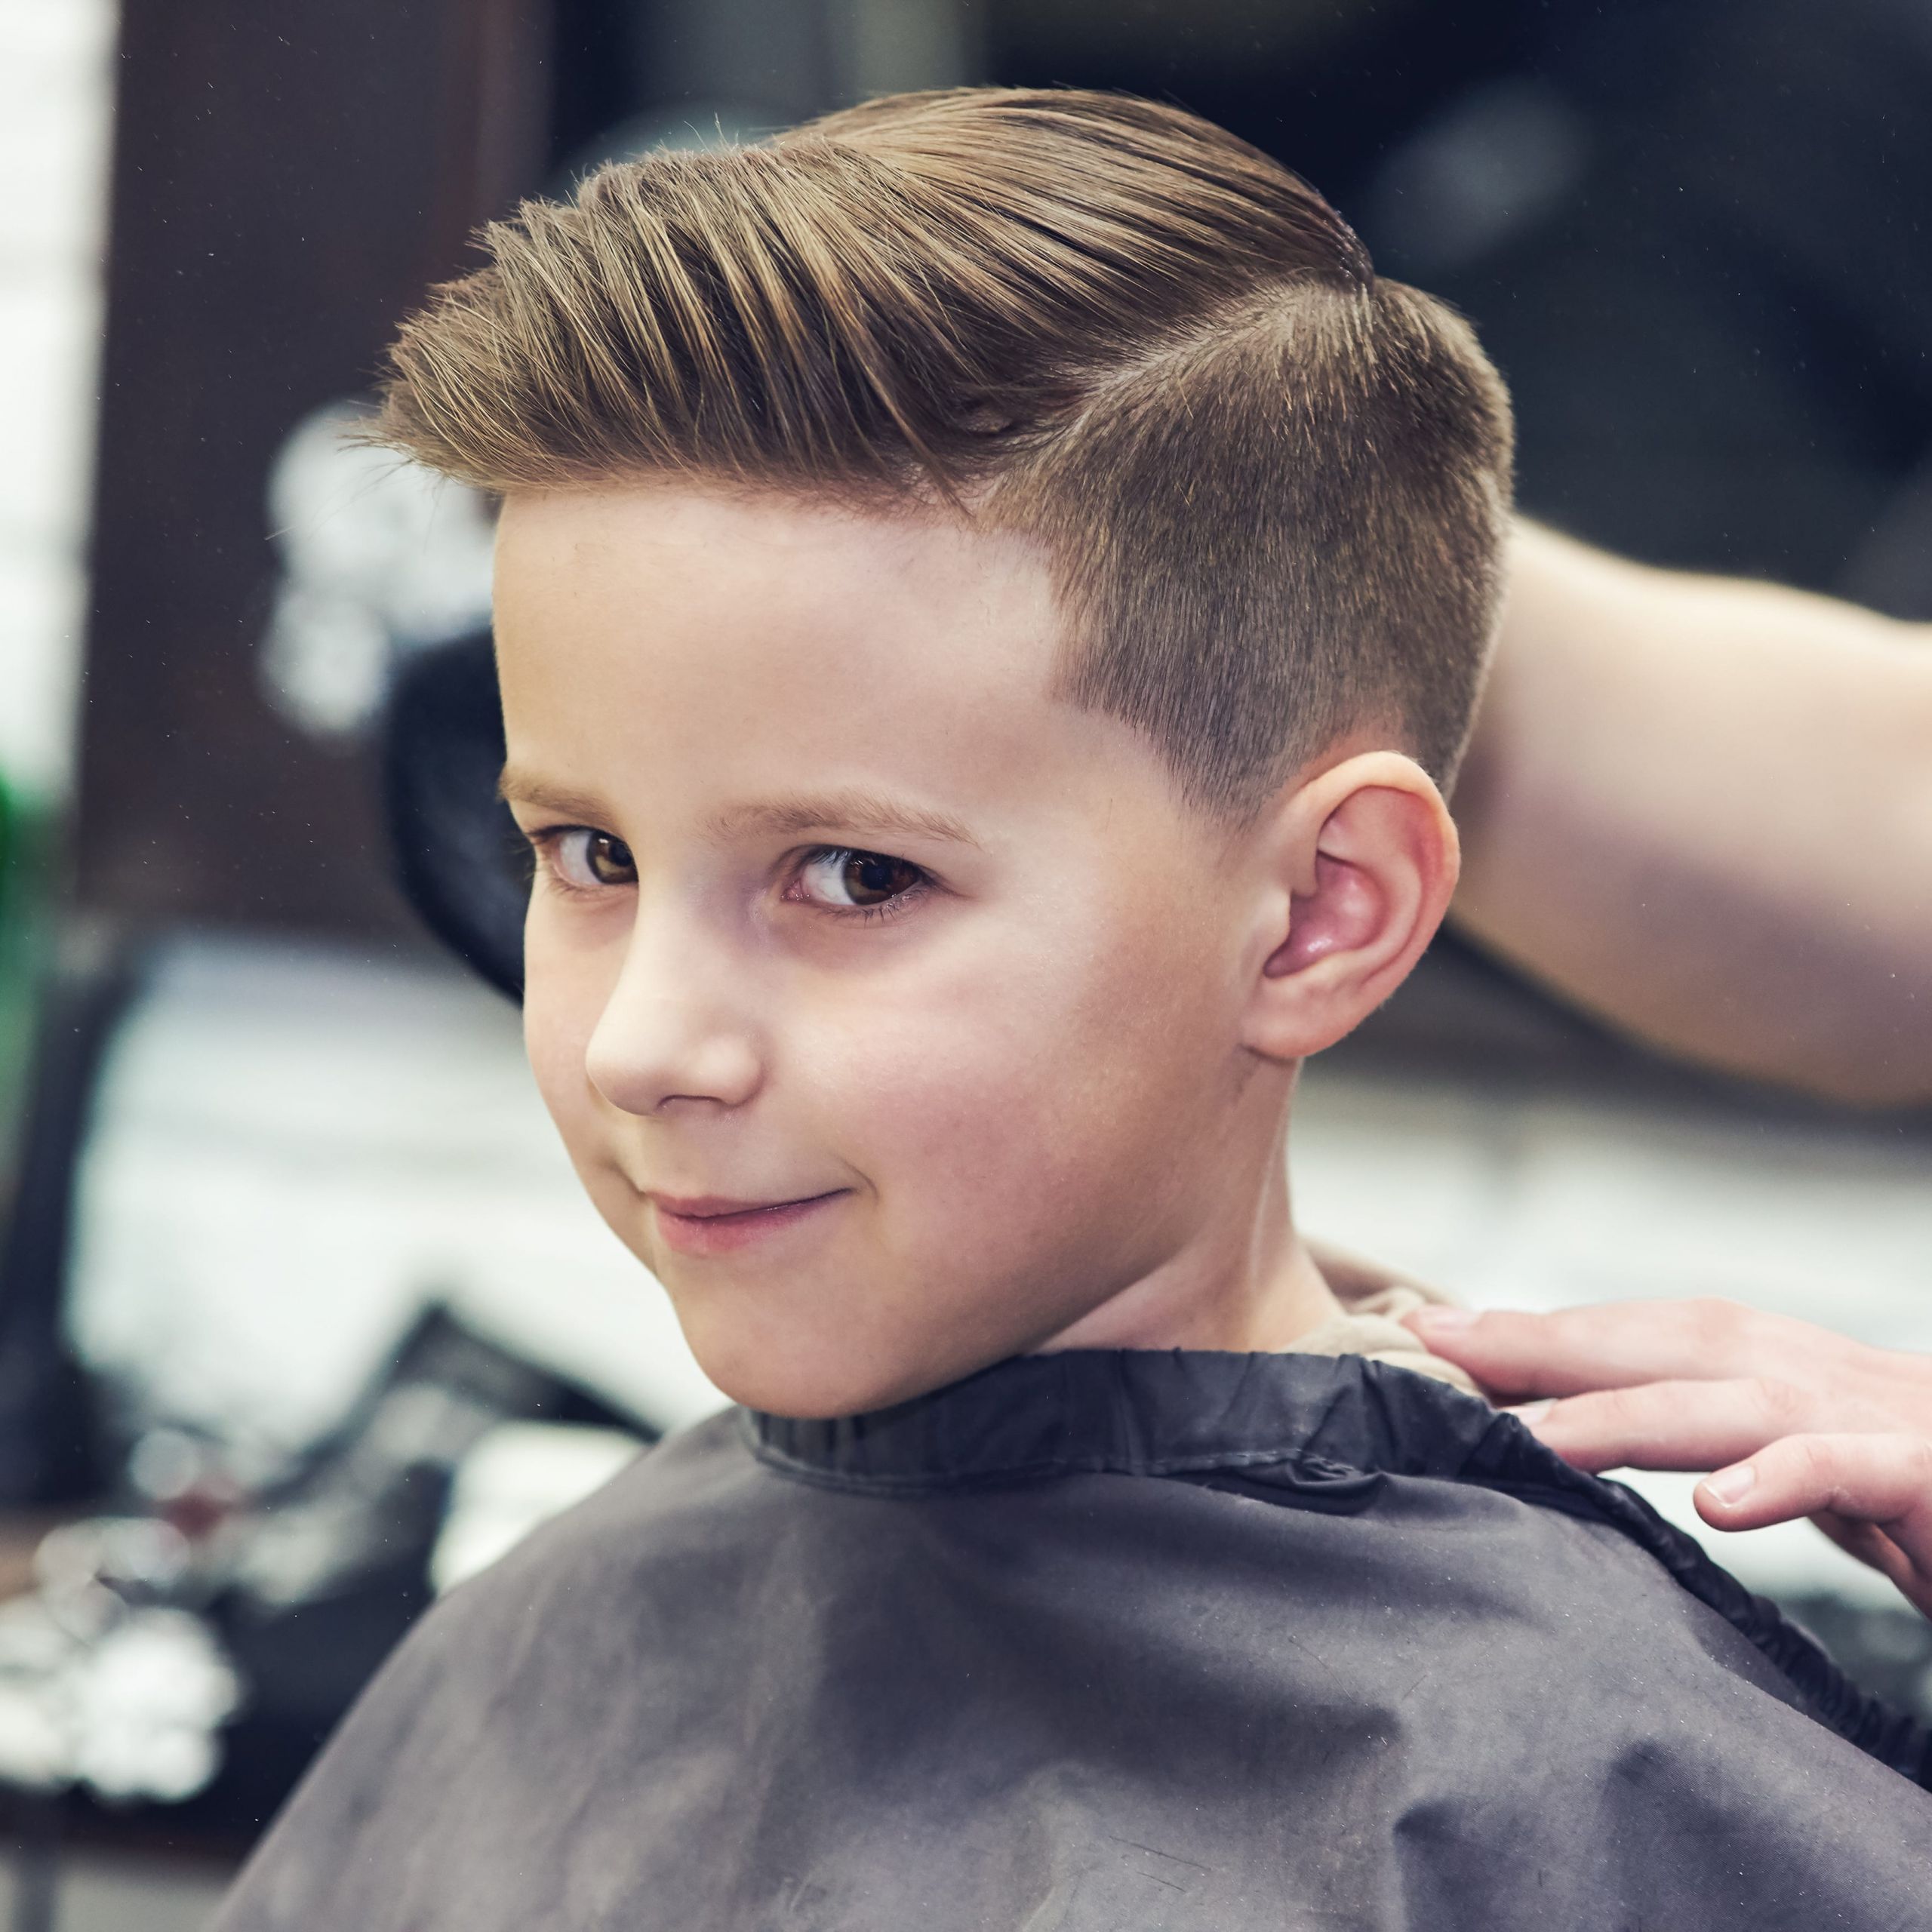 Kids Hair Cut
 40 Excellent School Haircuts for Boys Styling Tips